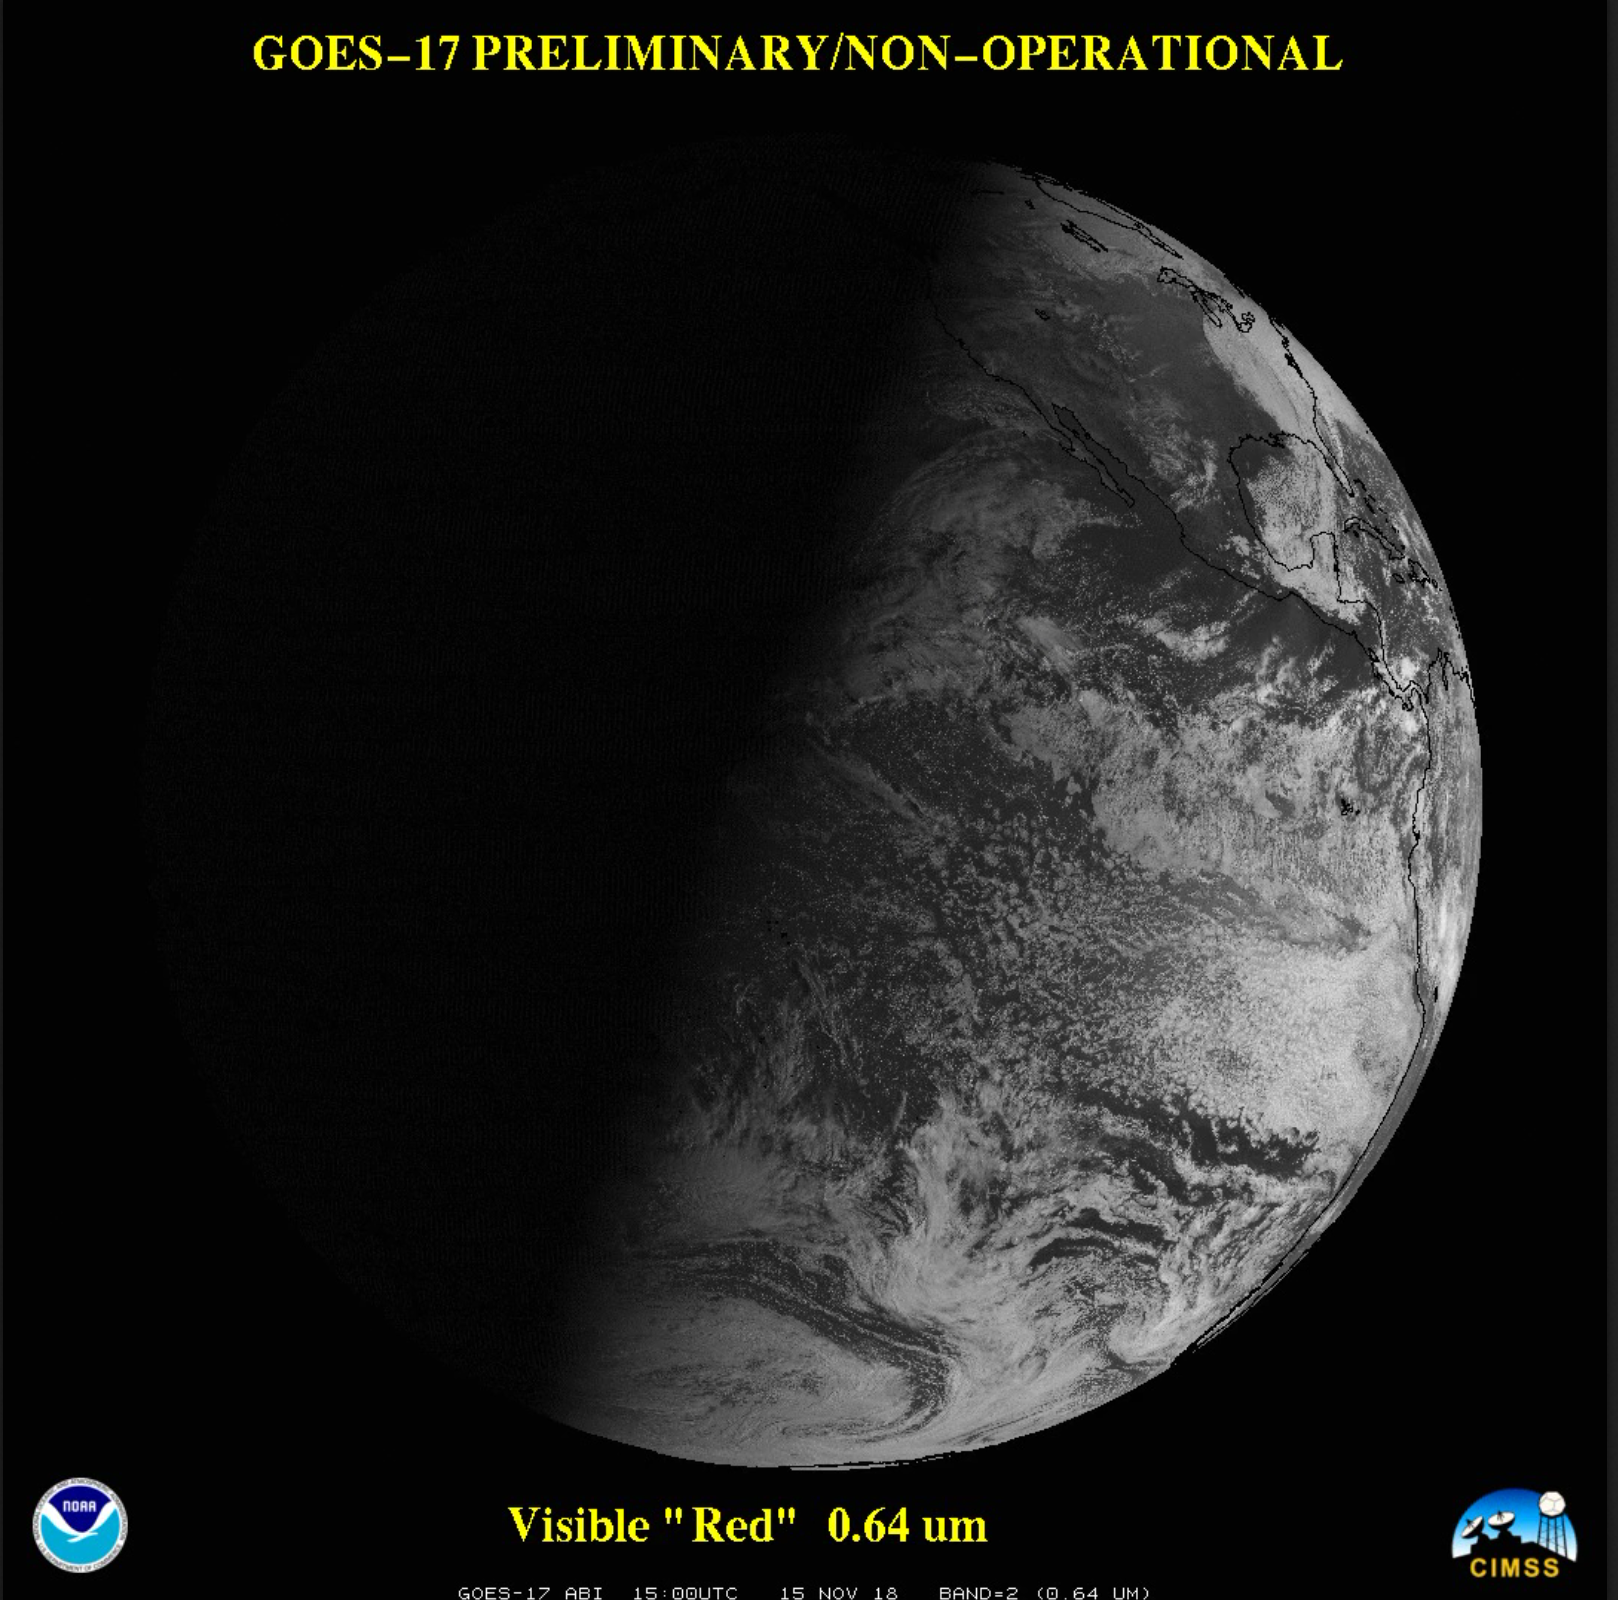 Full Disk images of the 16 ABI bands from GOES-17 [click to play MP4 animation]